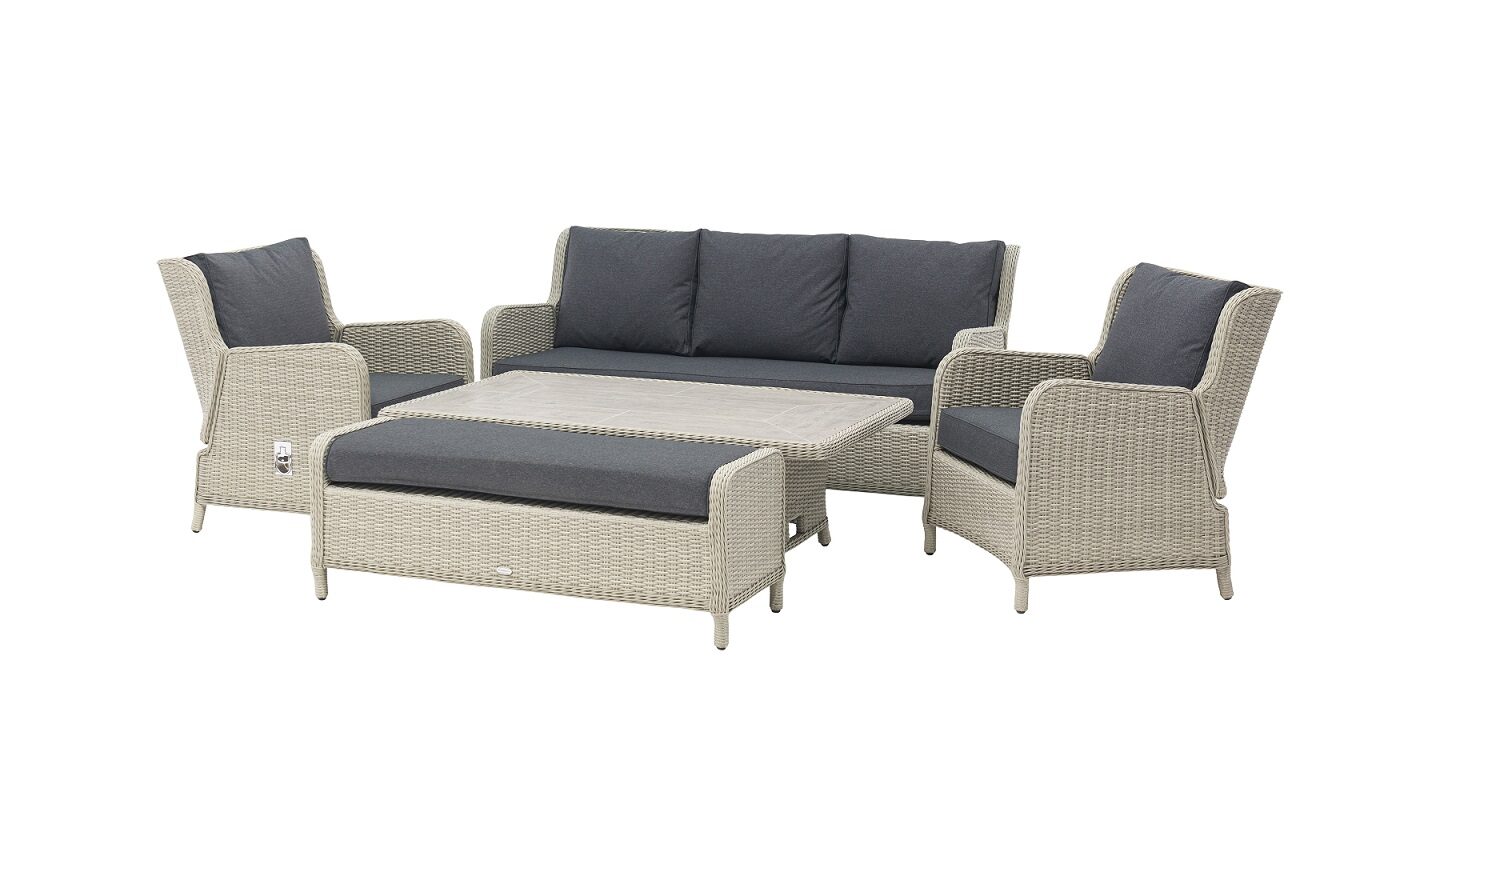 Bramblecrest Chedworth Dove Grey Reclining 3 Seater Sofa With Hilo Table 2 Reclining Armchairs Casual Bench Studio 2